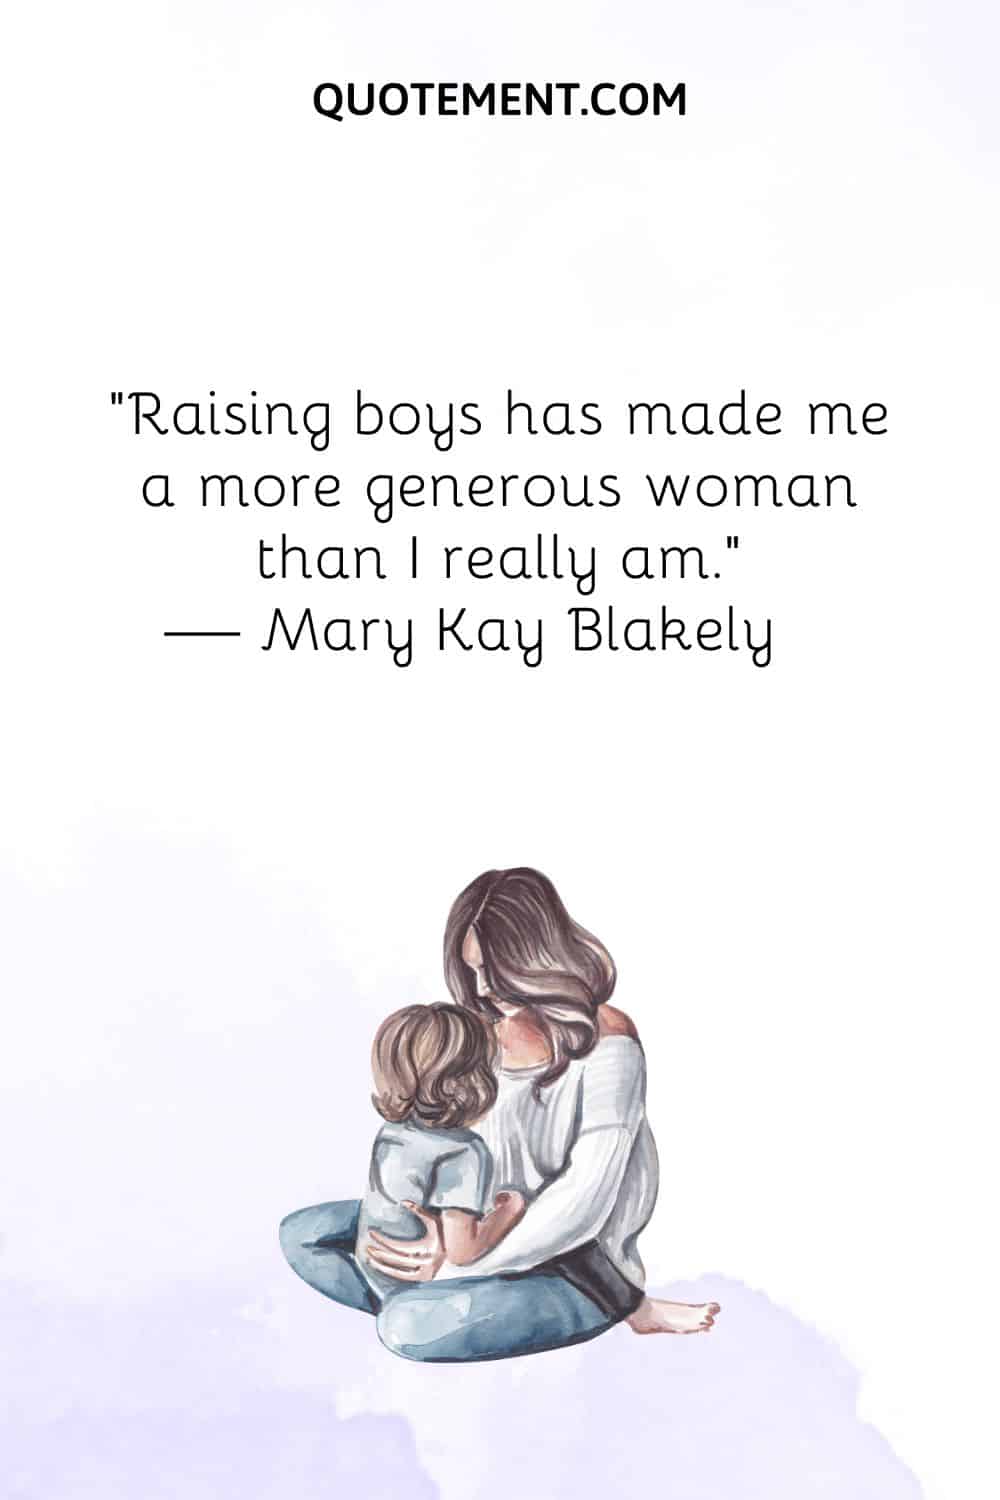 Raising boys has made me a more generous woman than I really am